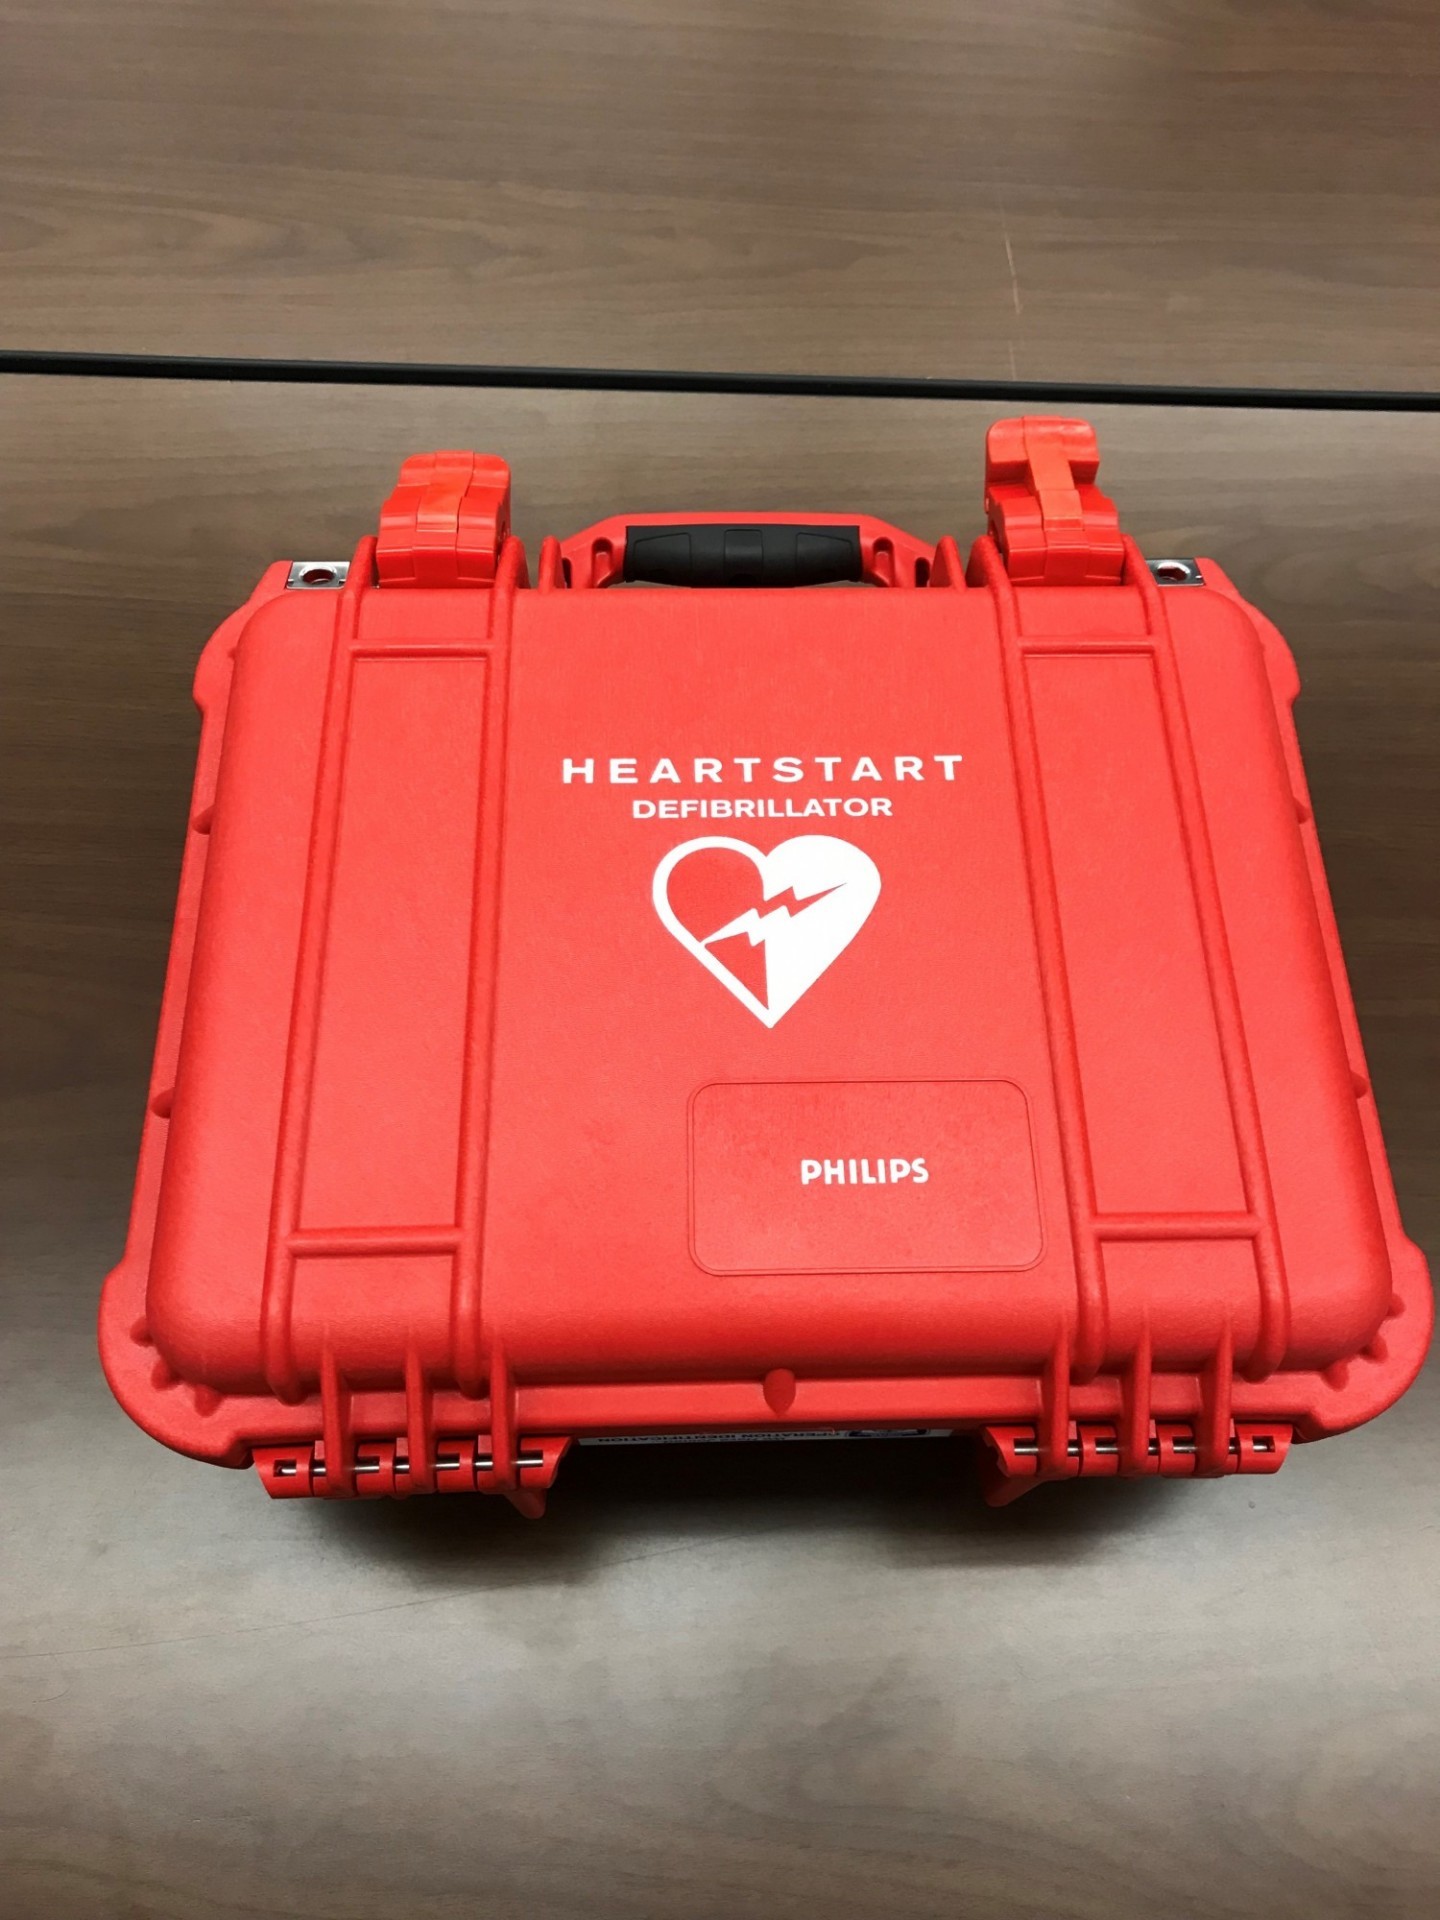 A picture of a defibrillation device